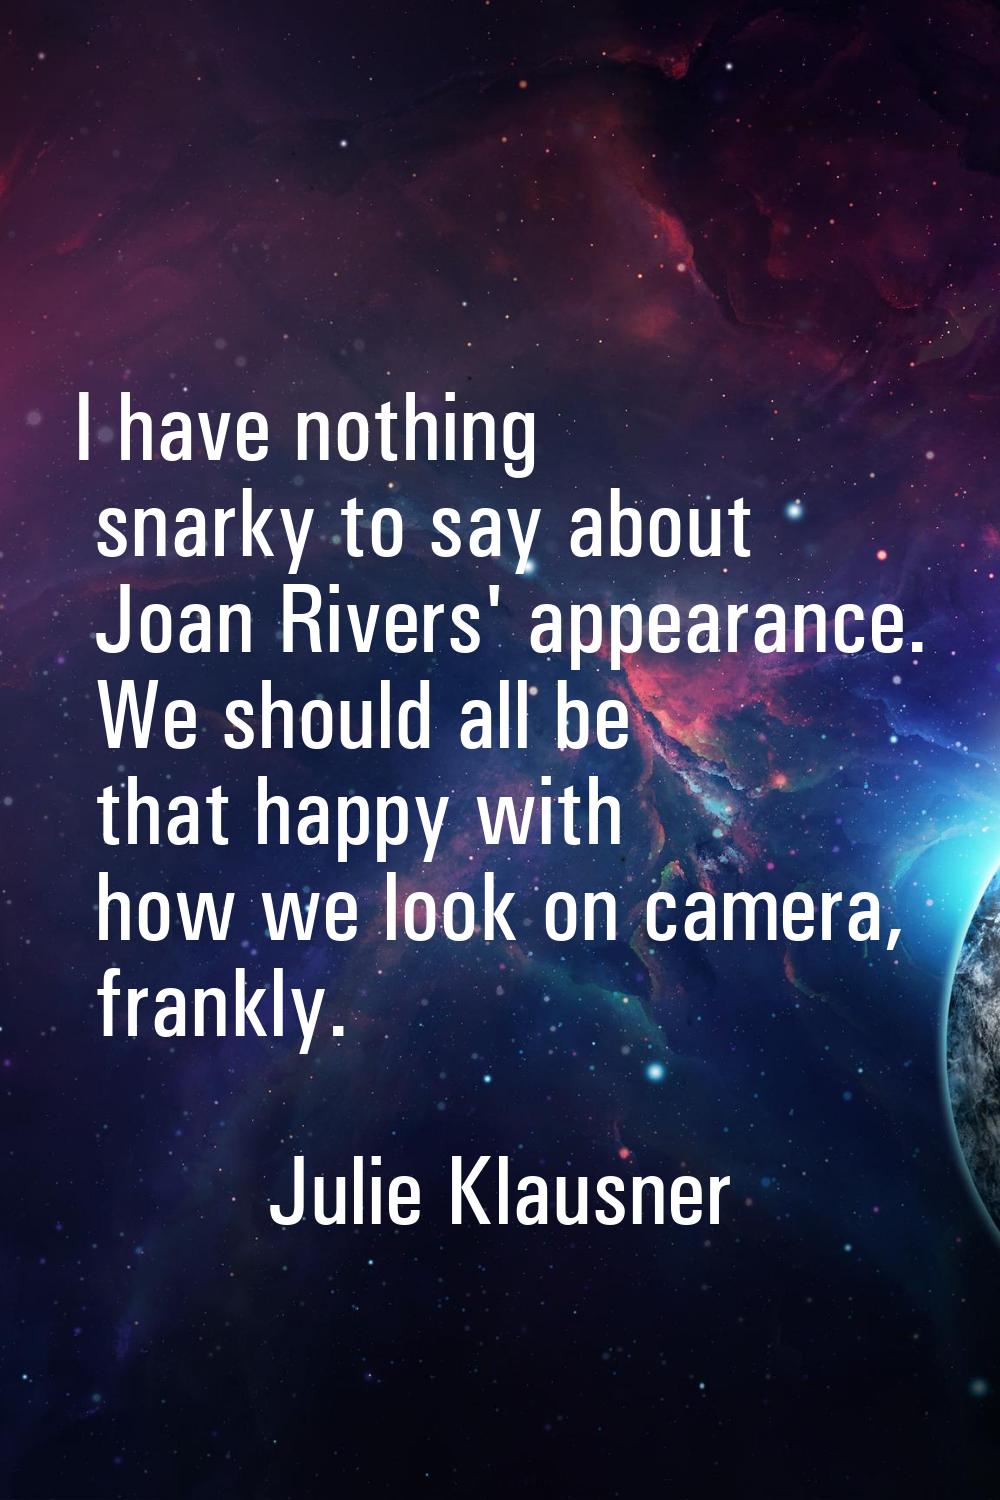 I have nothing snarky to say about Joan Rivers' appearance. We should all be that happy with how we